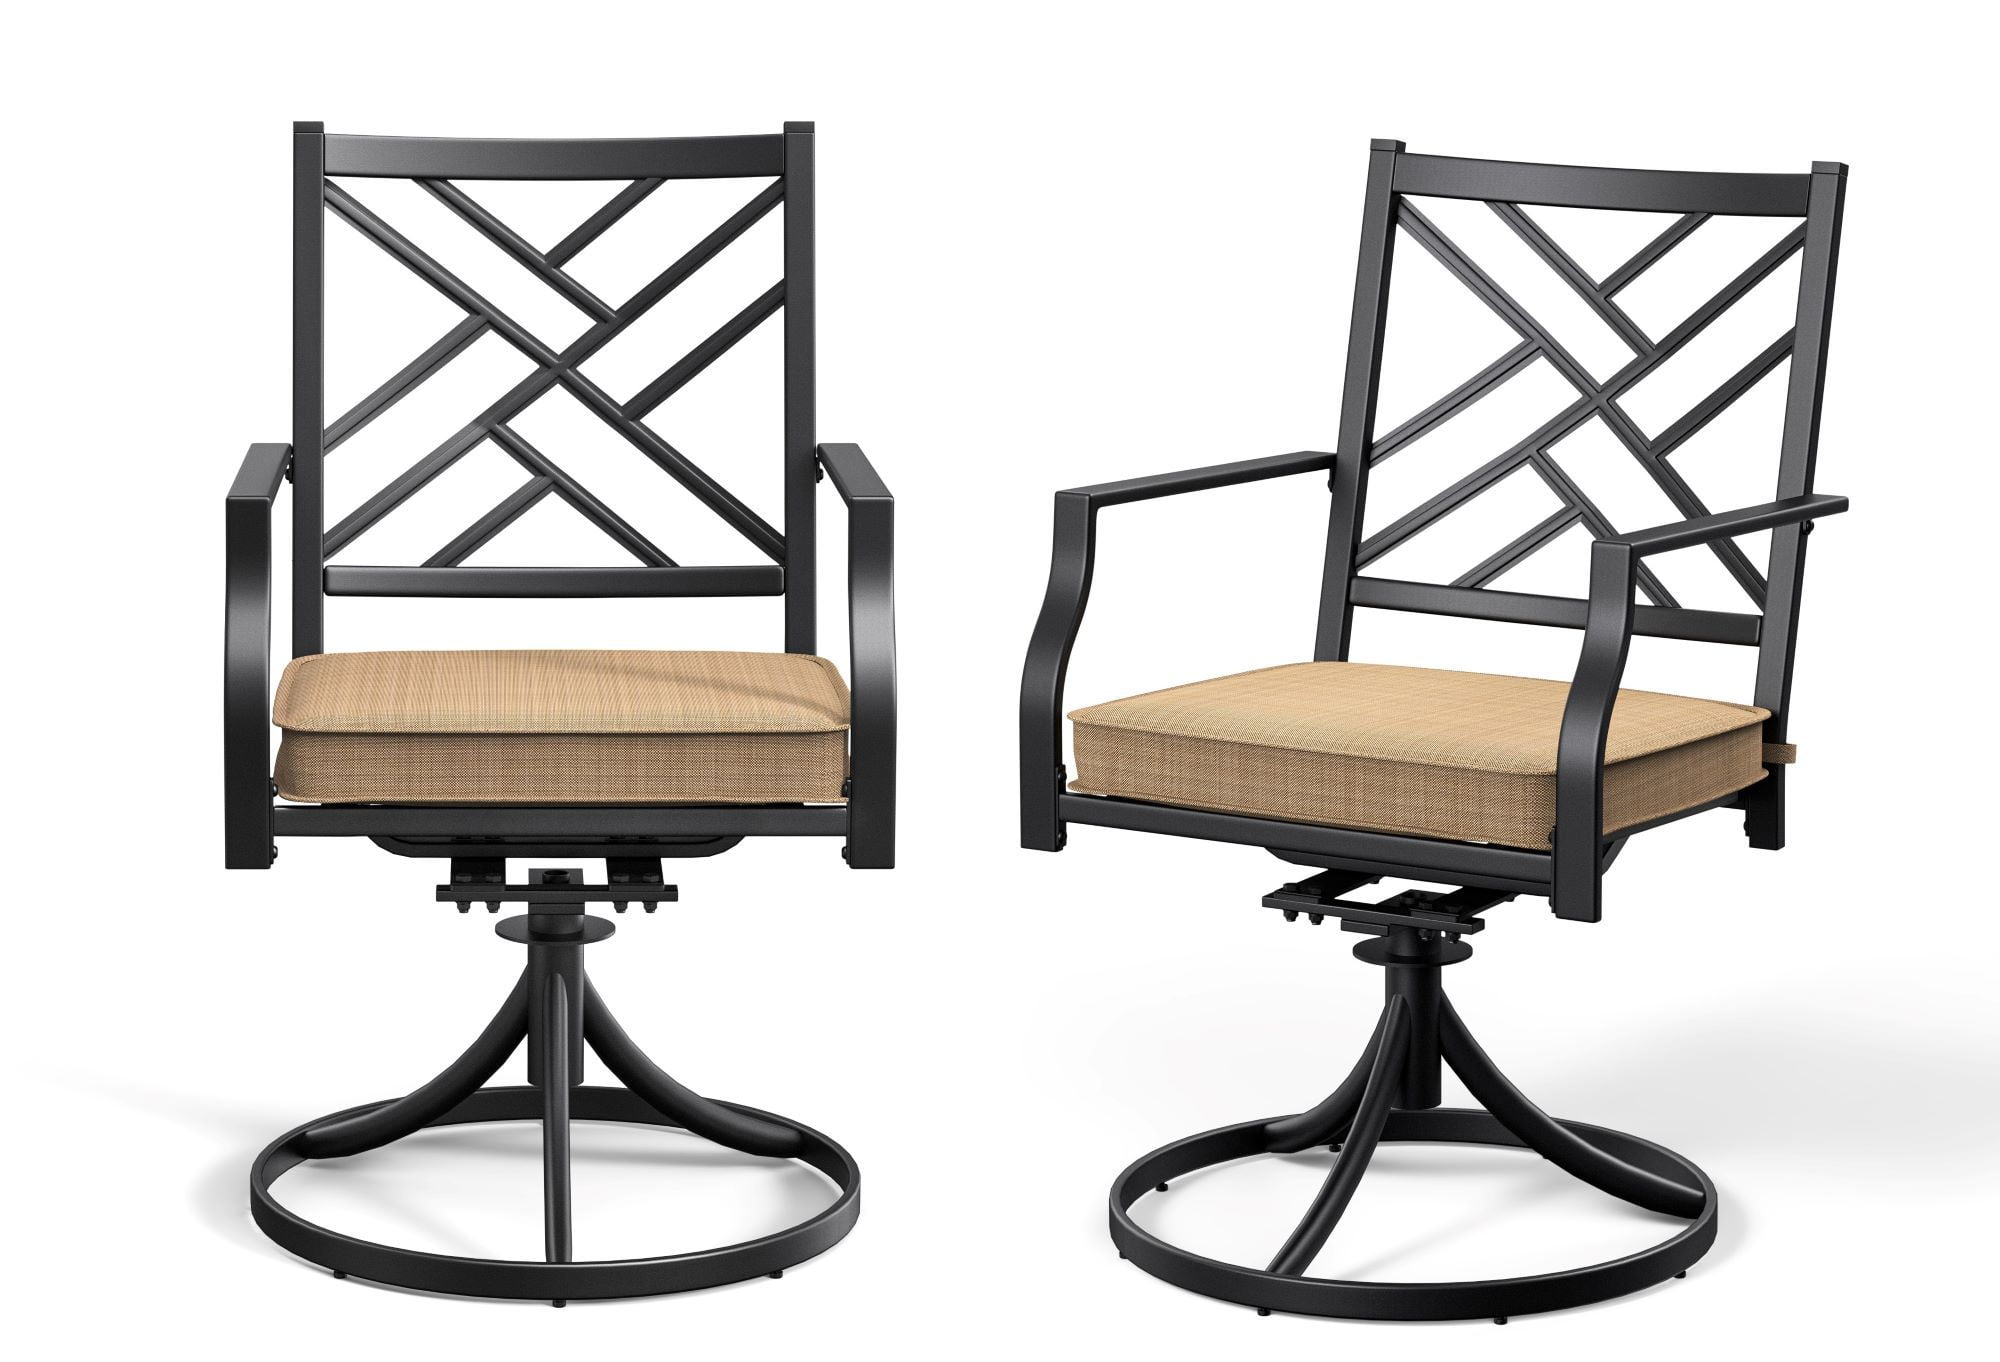 Details about   Patio Chair Set of 2 with Cushion Swivel Dining Chairs Garden Outdoor Furniture 